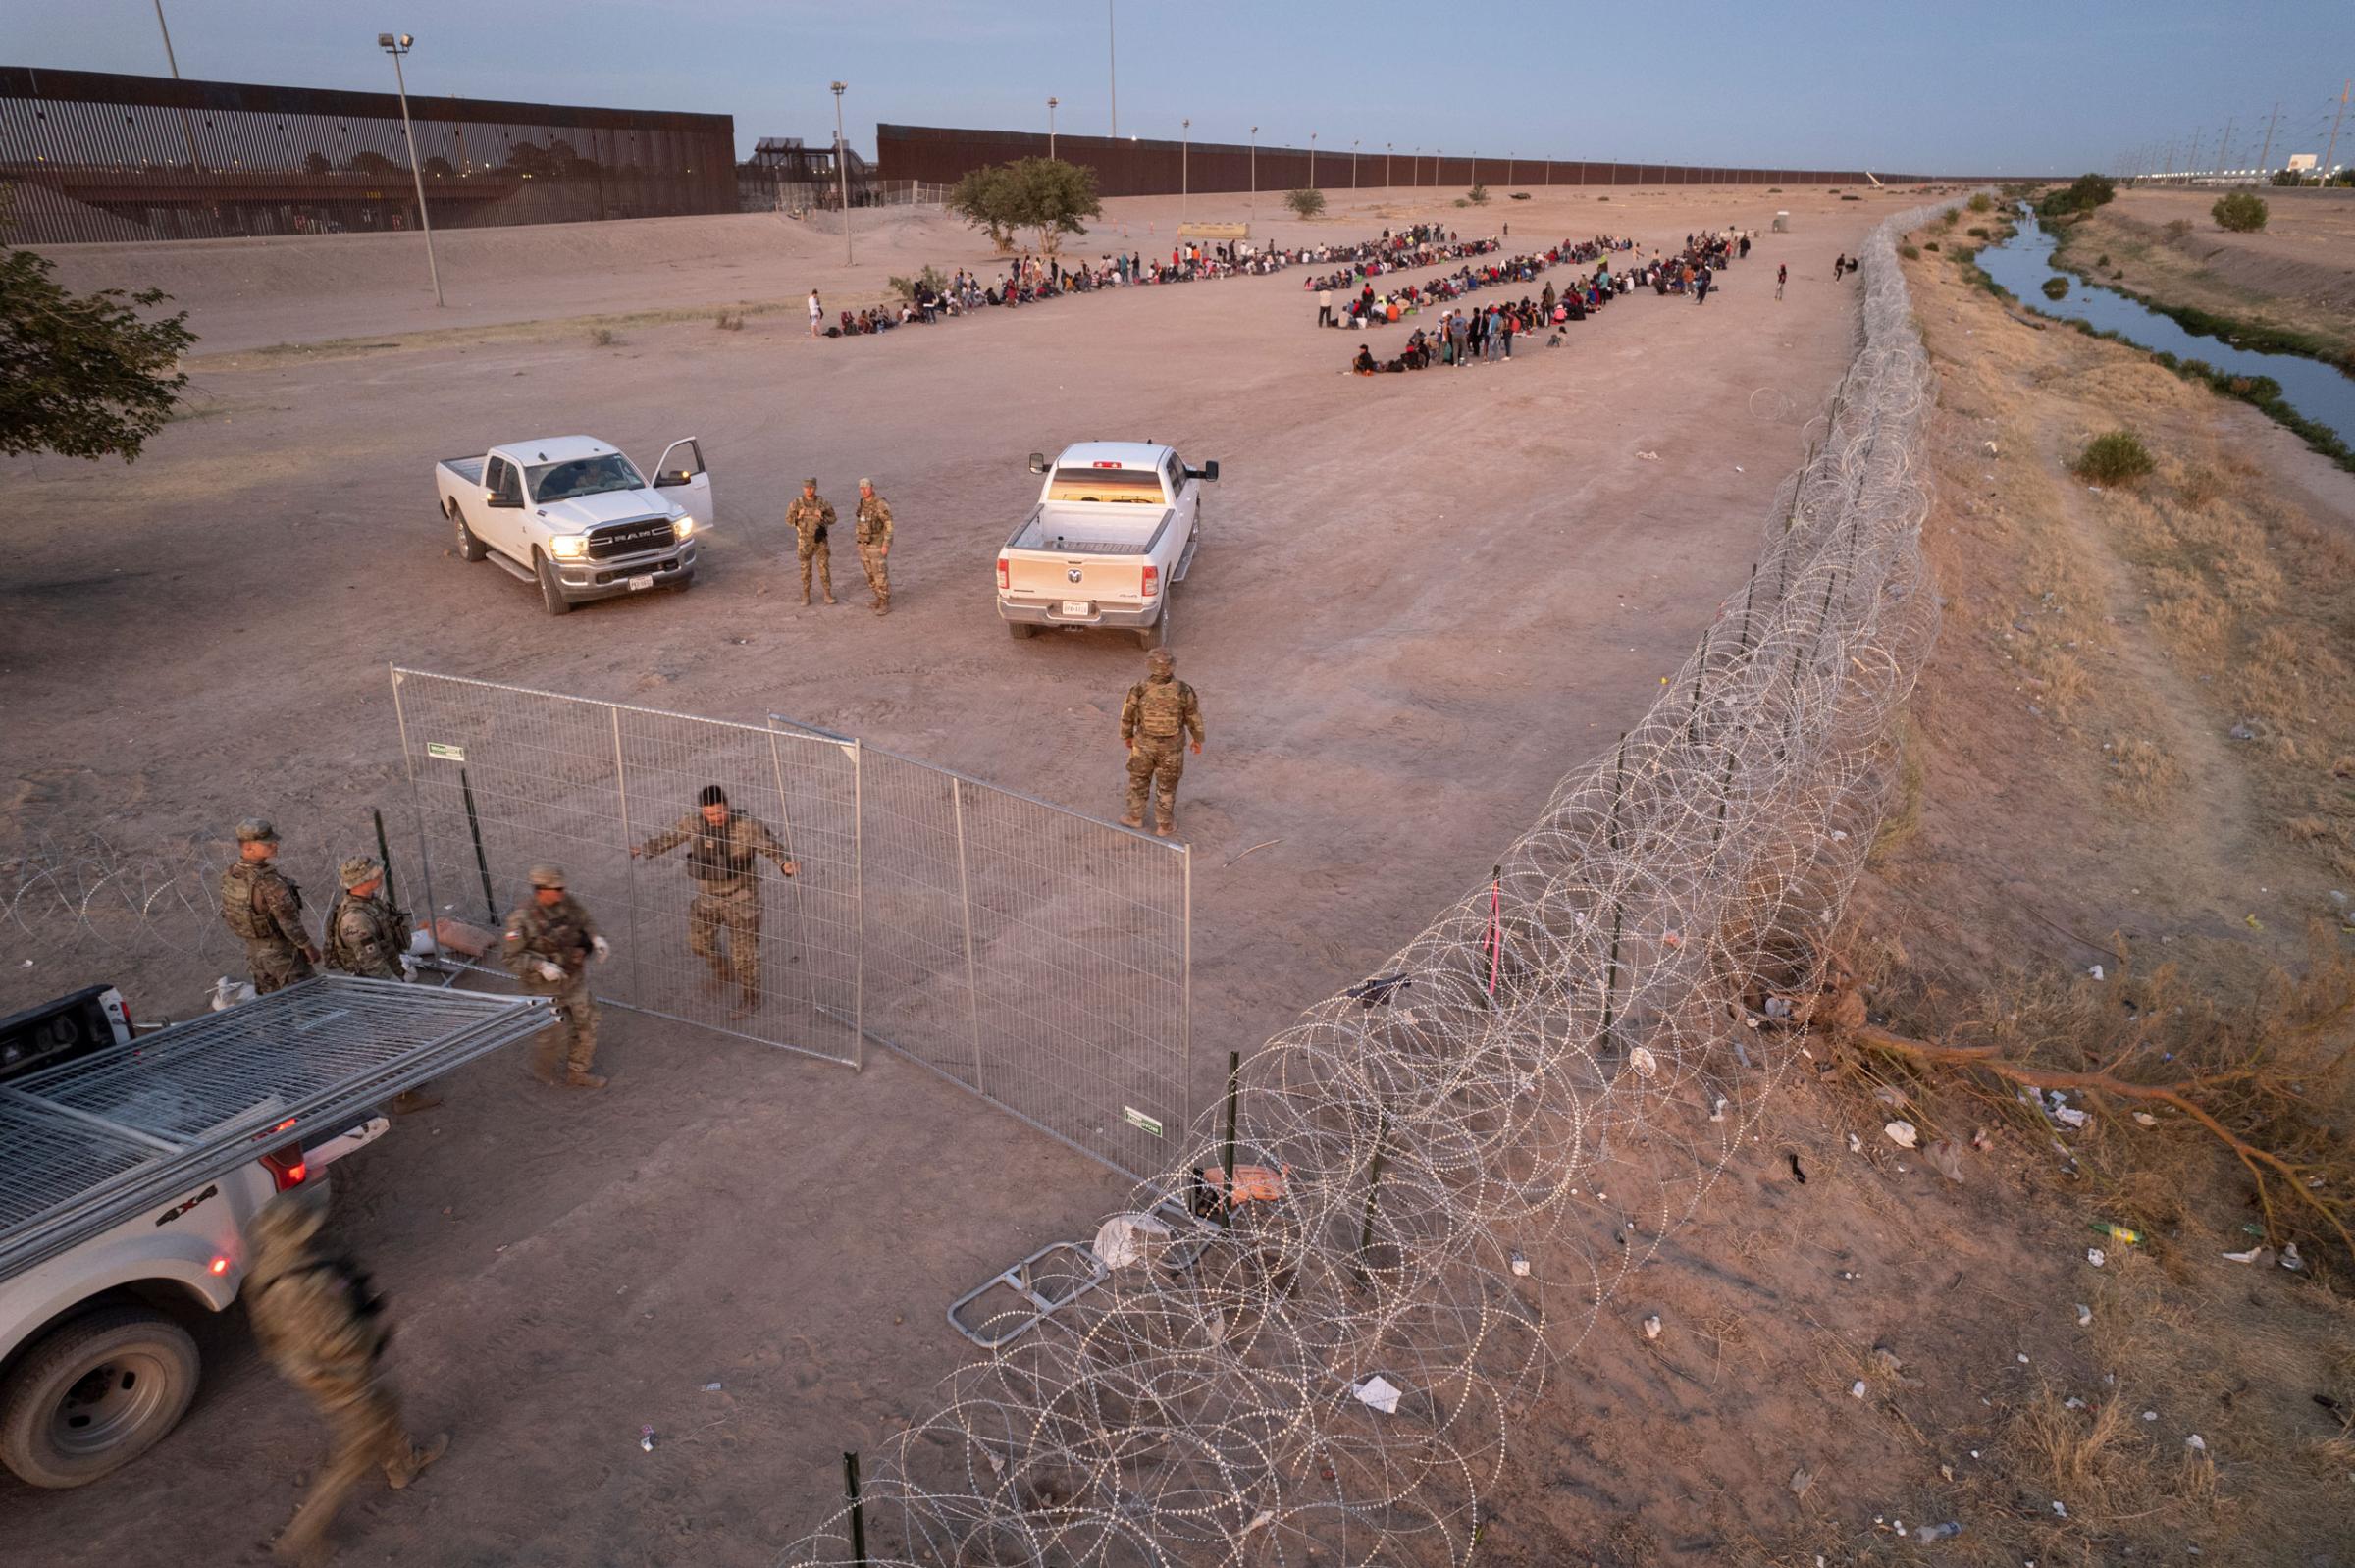 As seen from an aerial view, Texas National Guard troops set up a “choke point” near hundreds of immigrants who had crossed into the United States from Mexico